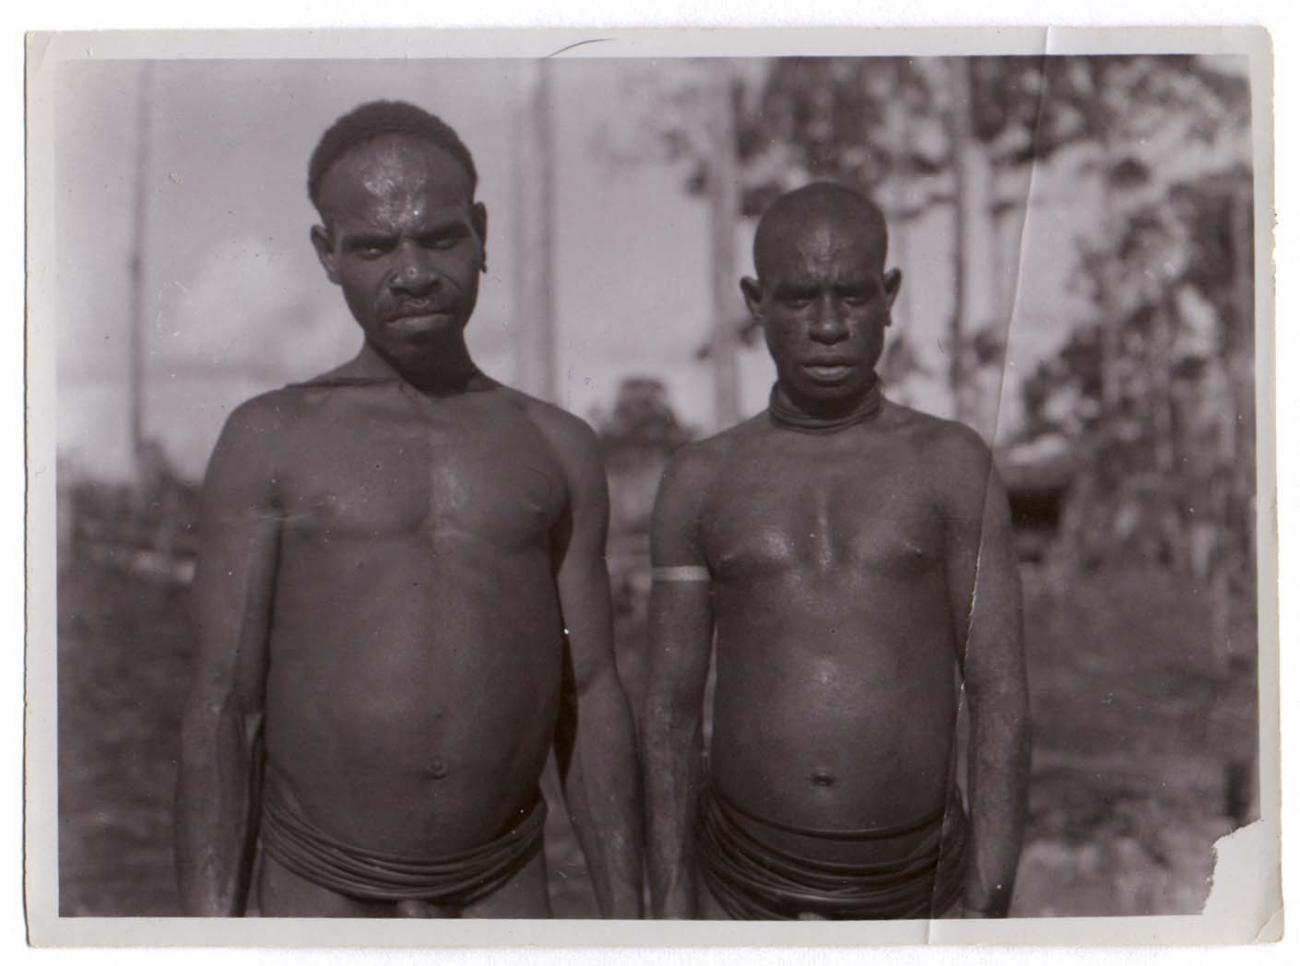 BD/38/7 - 
Two men from West Papua.
